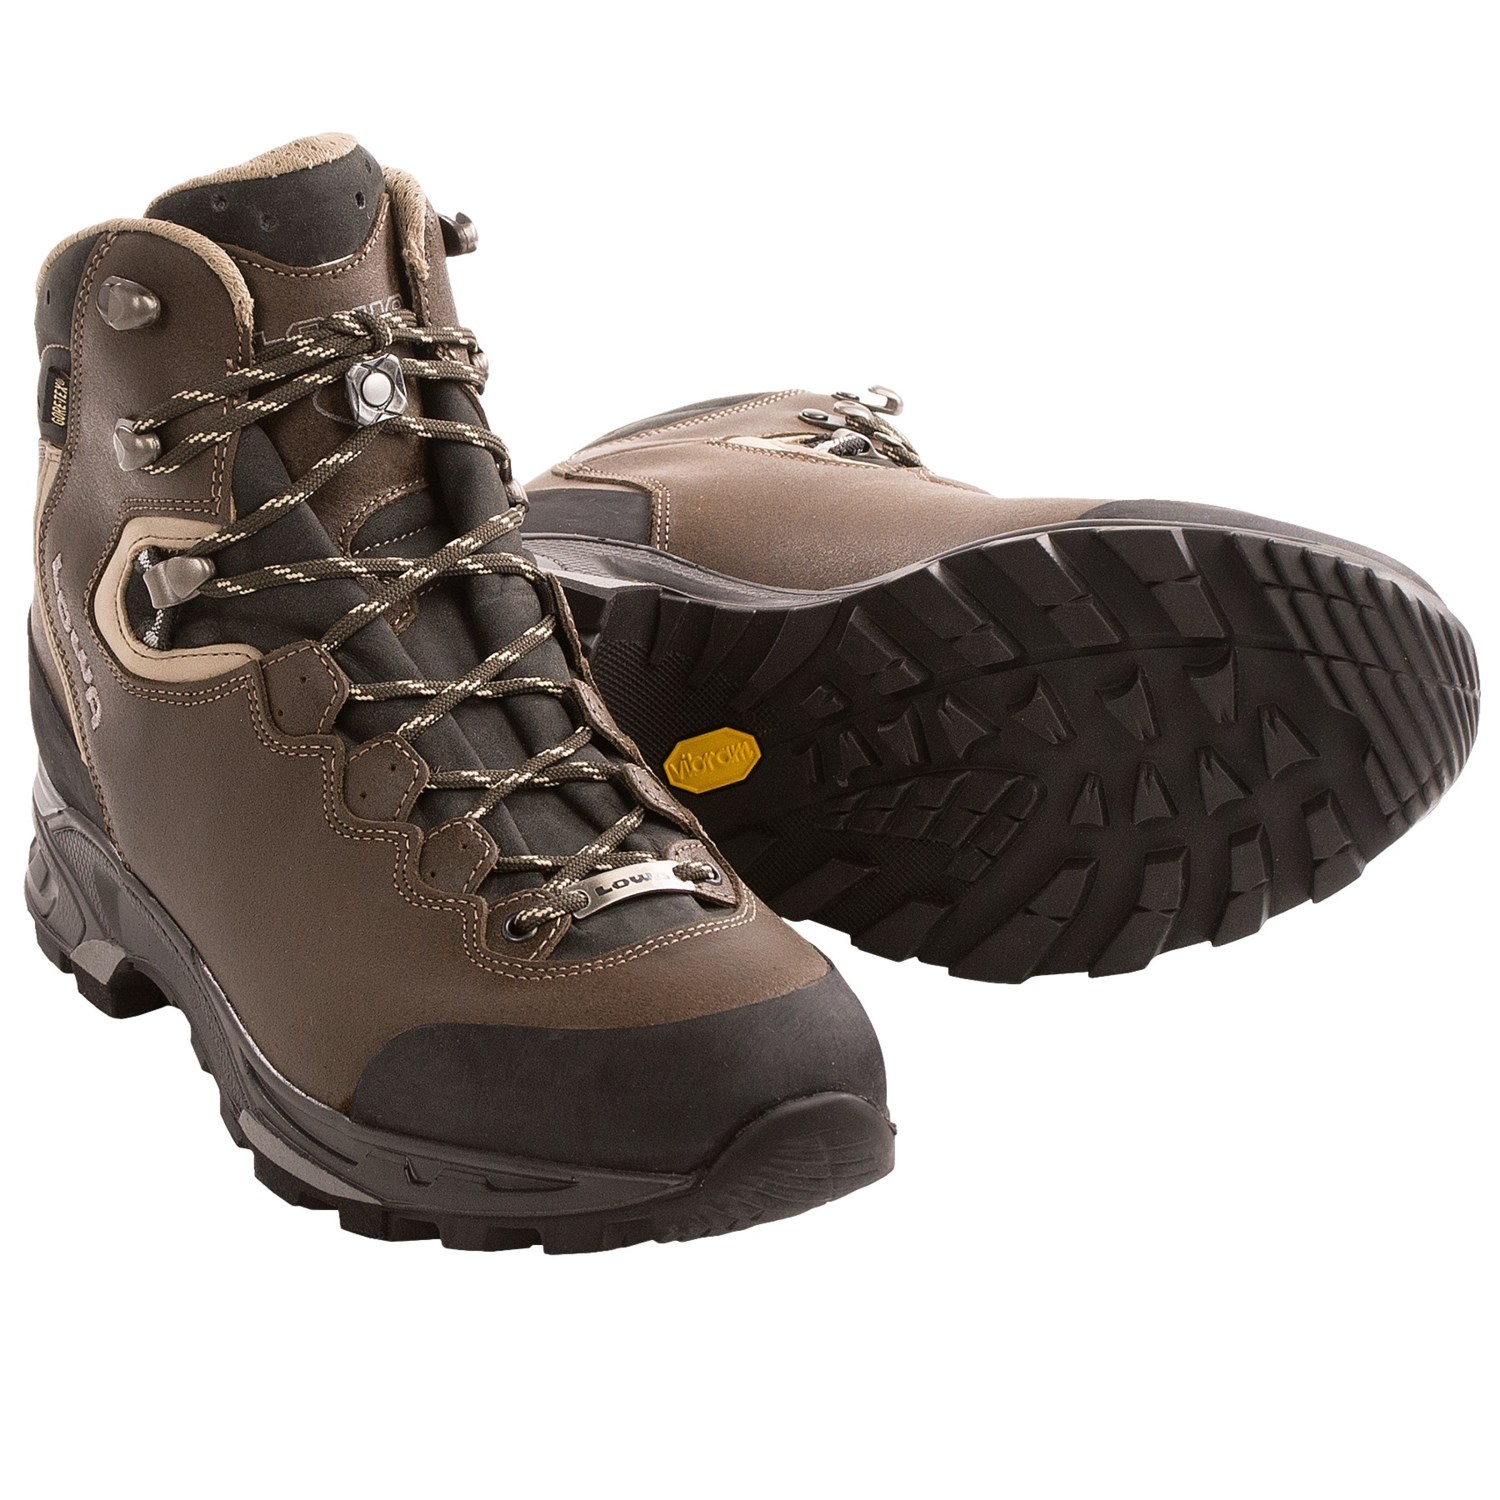 Women's Waterproof Hiking Boots Clearance | Division of Global Affairs